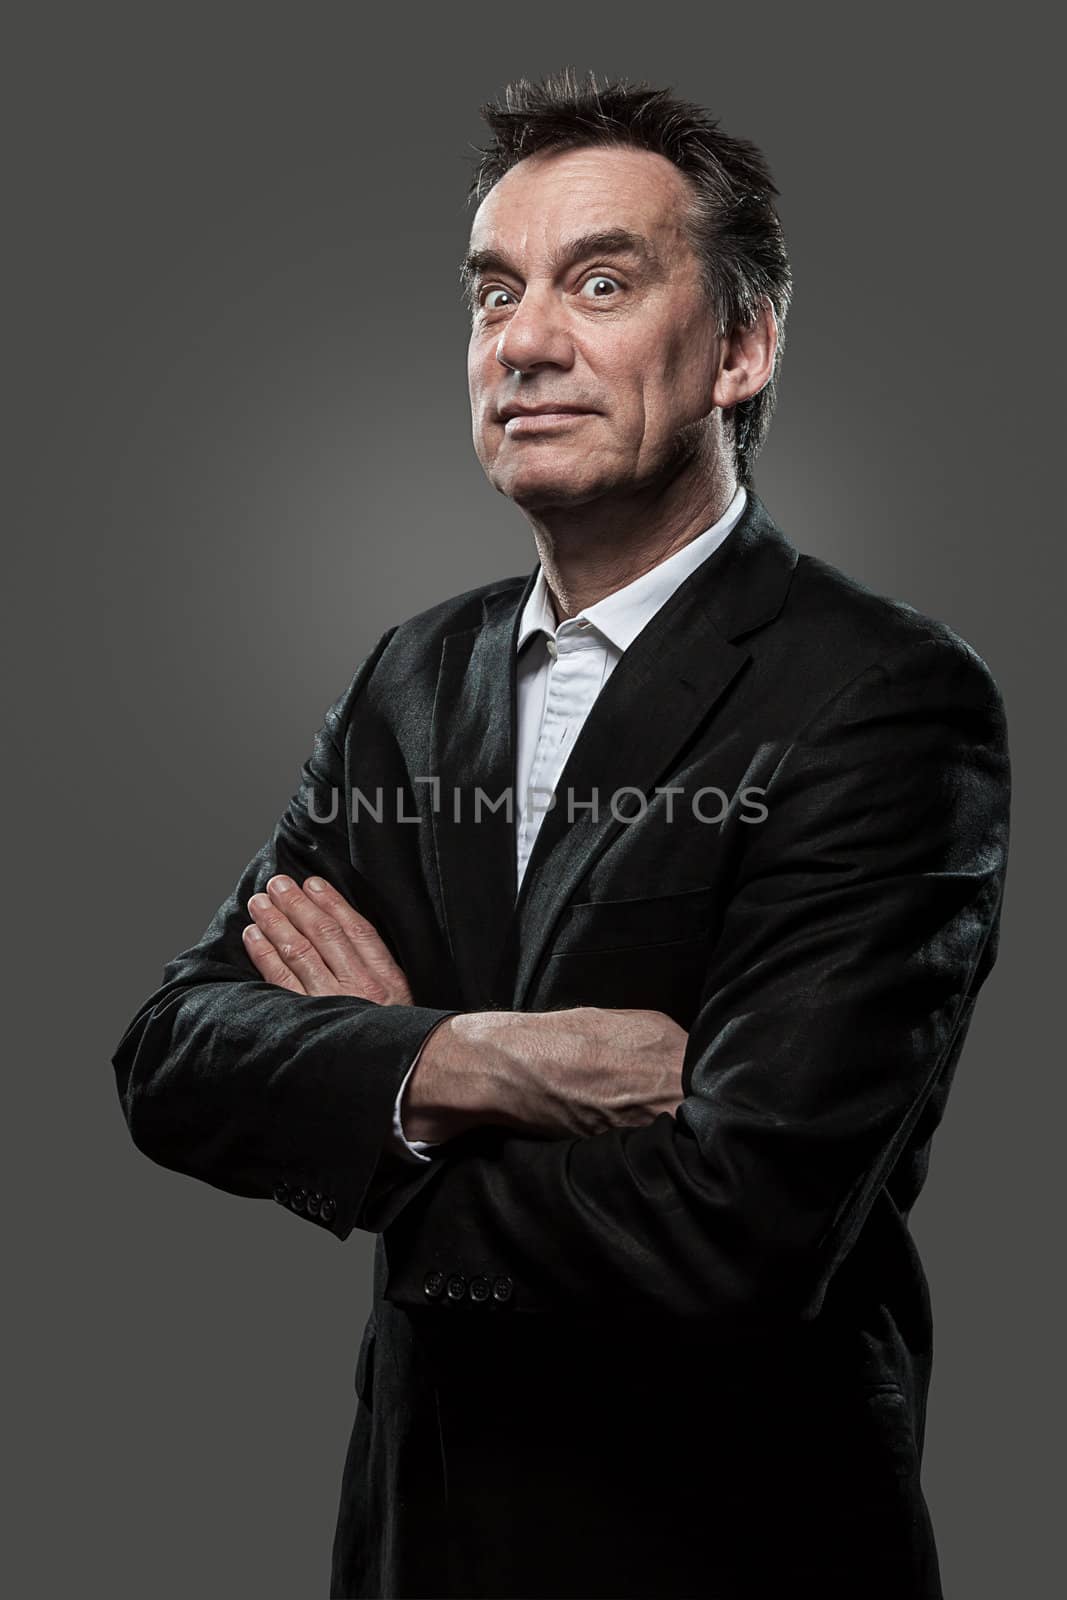 Handsome Middle Age Business Arms Folded Pulling Face Grey Background Grunge Look